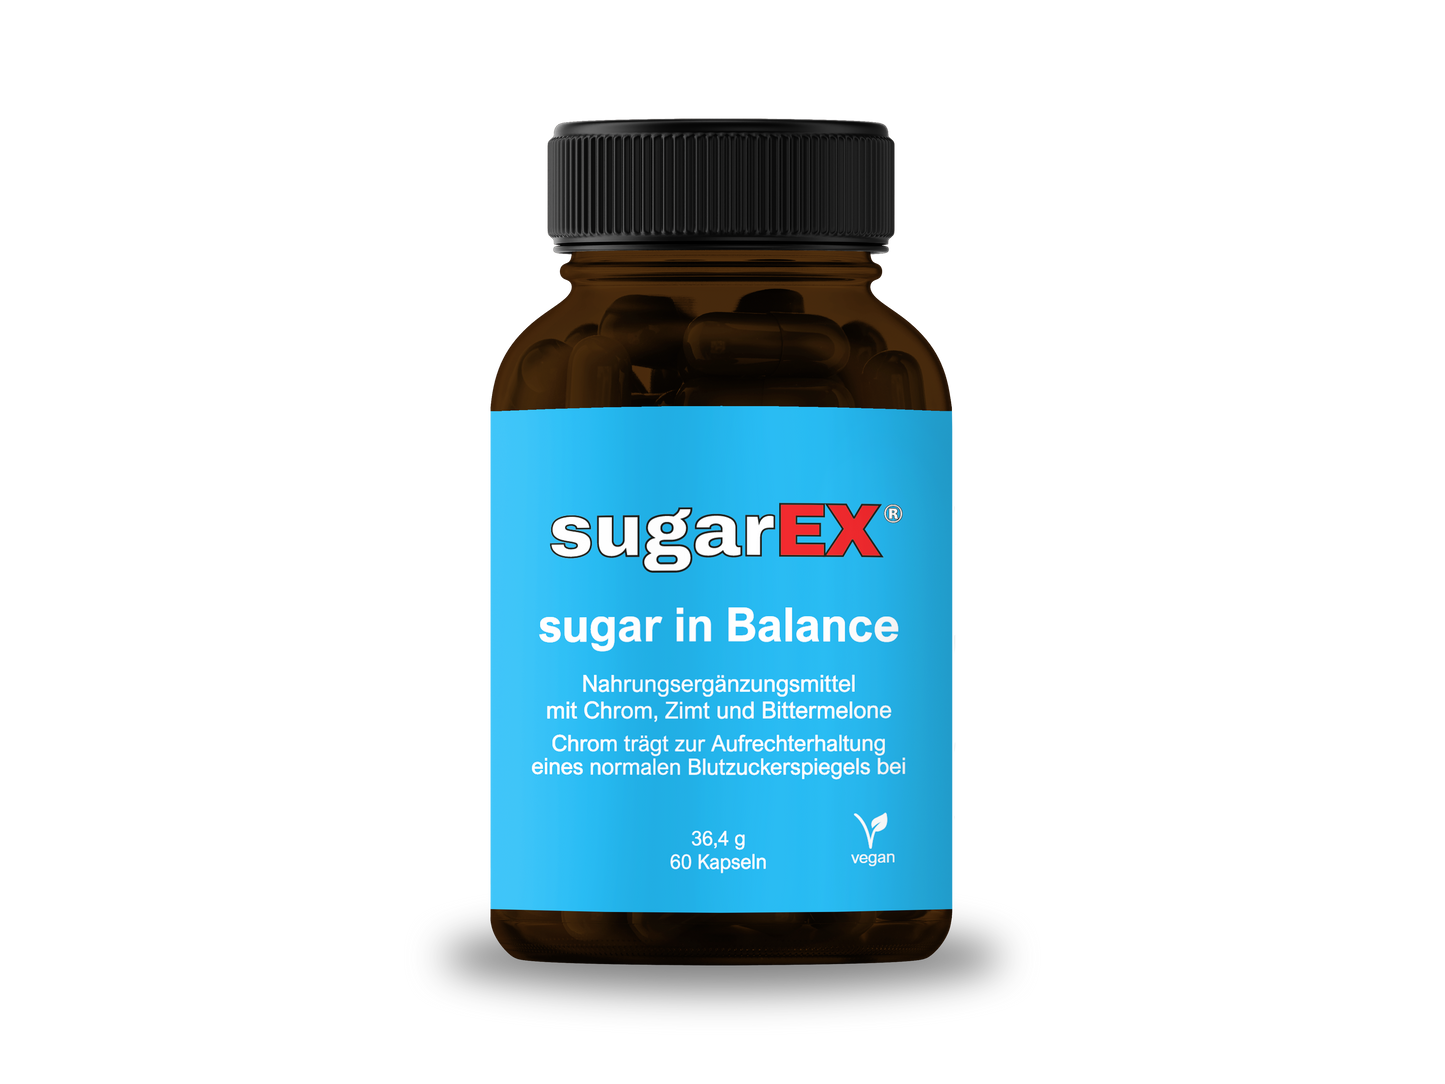 sugarEX - sugar in Balance - dietary supplement - designed to help you regulate your appetite and normalize blood sugar levels